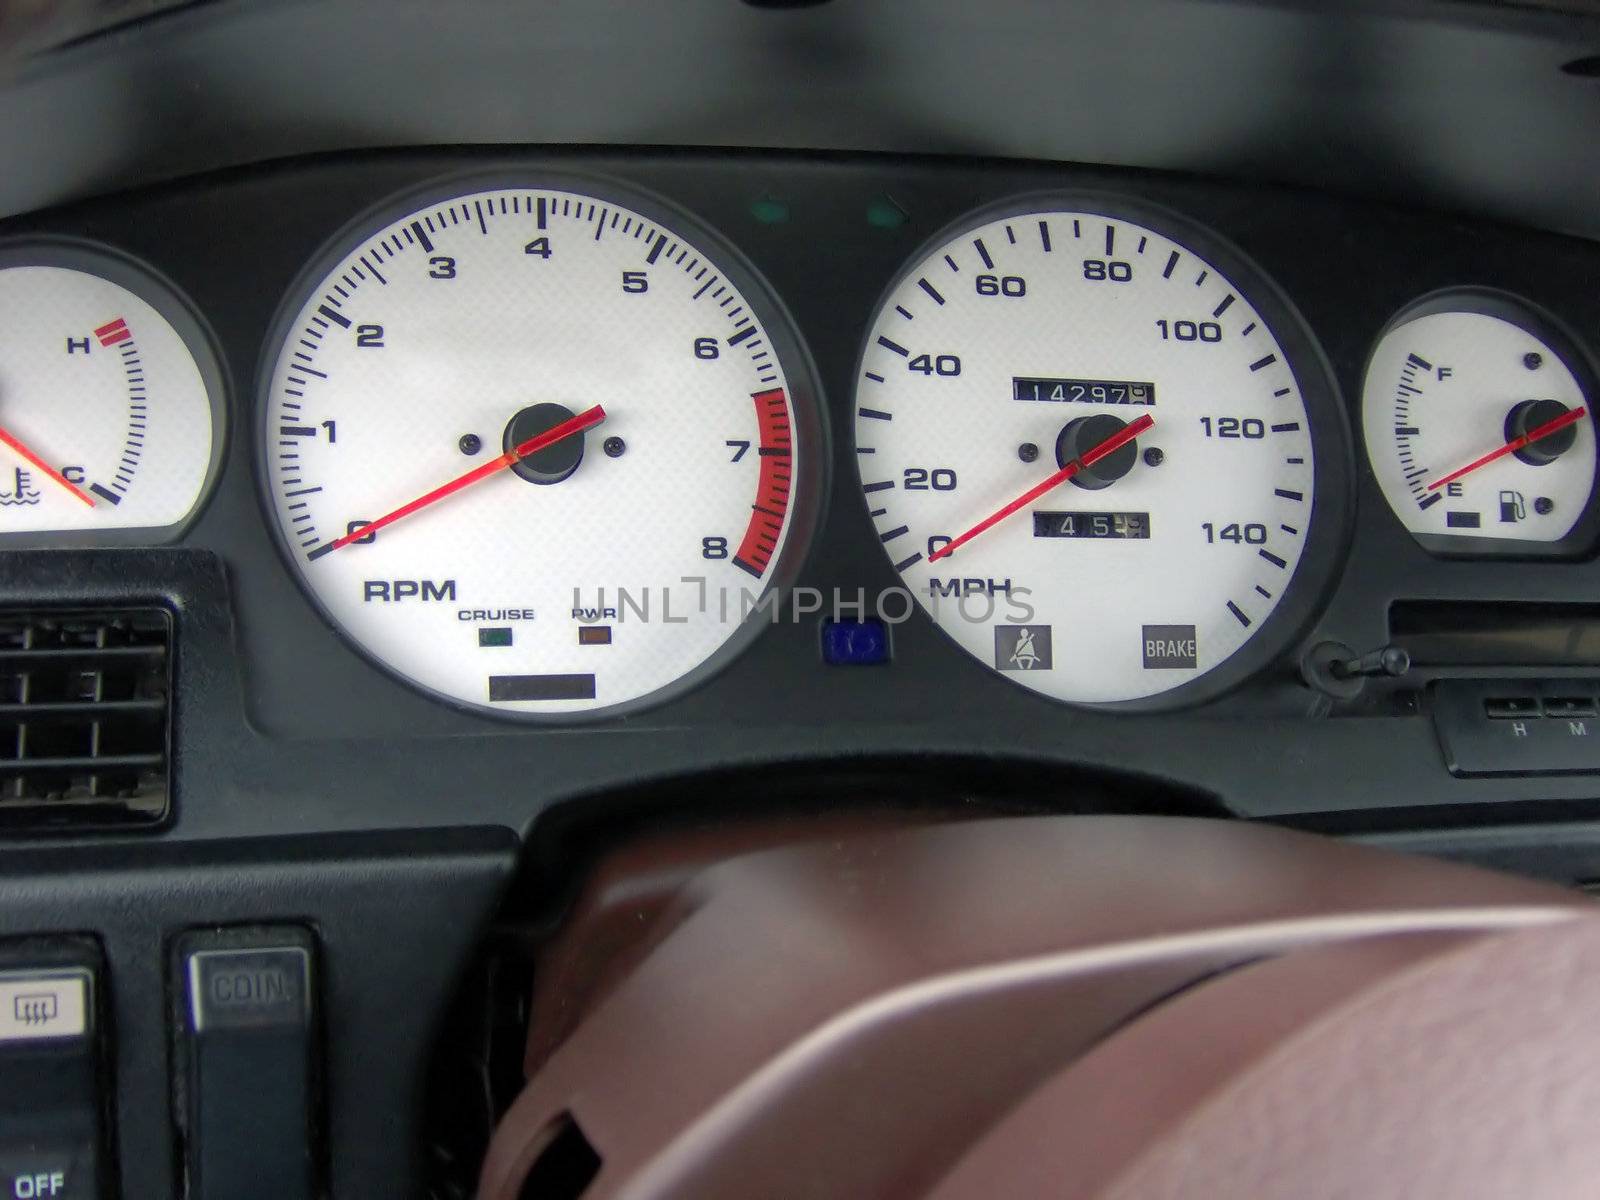 This is the custom indiglo gauge cluster in my mk3 Toyota Supra.